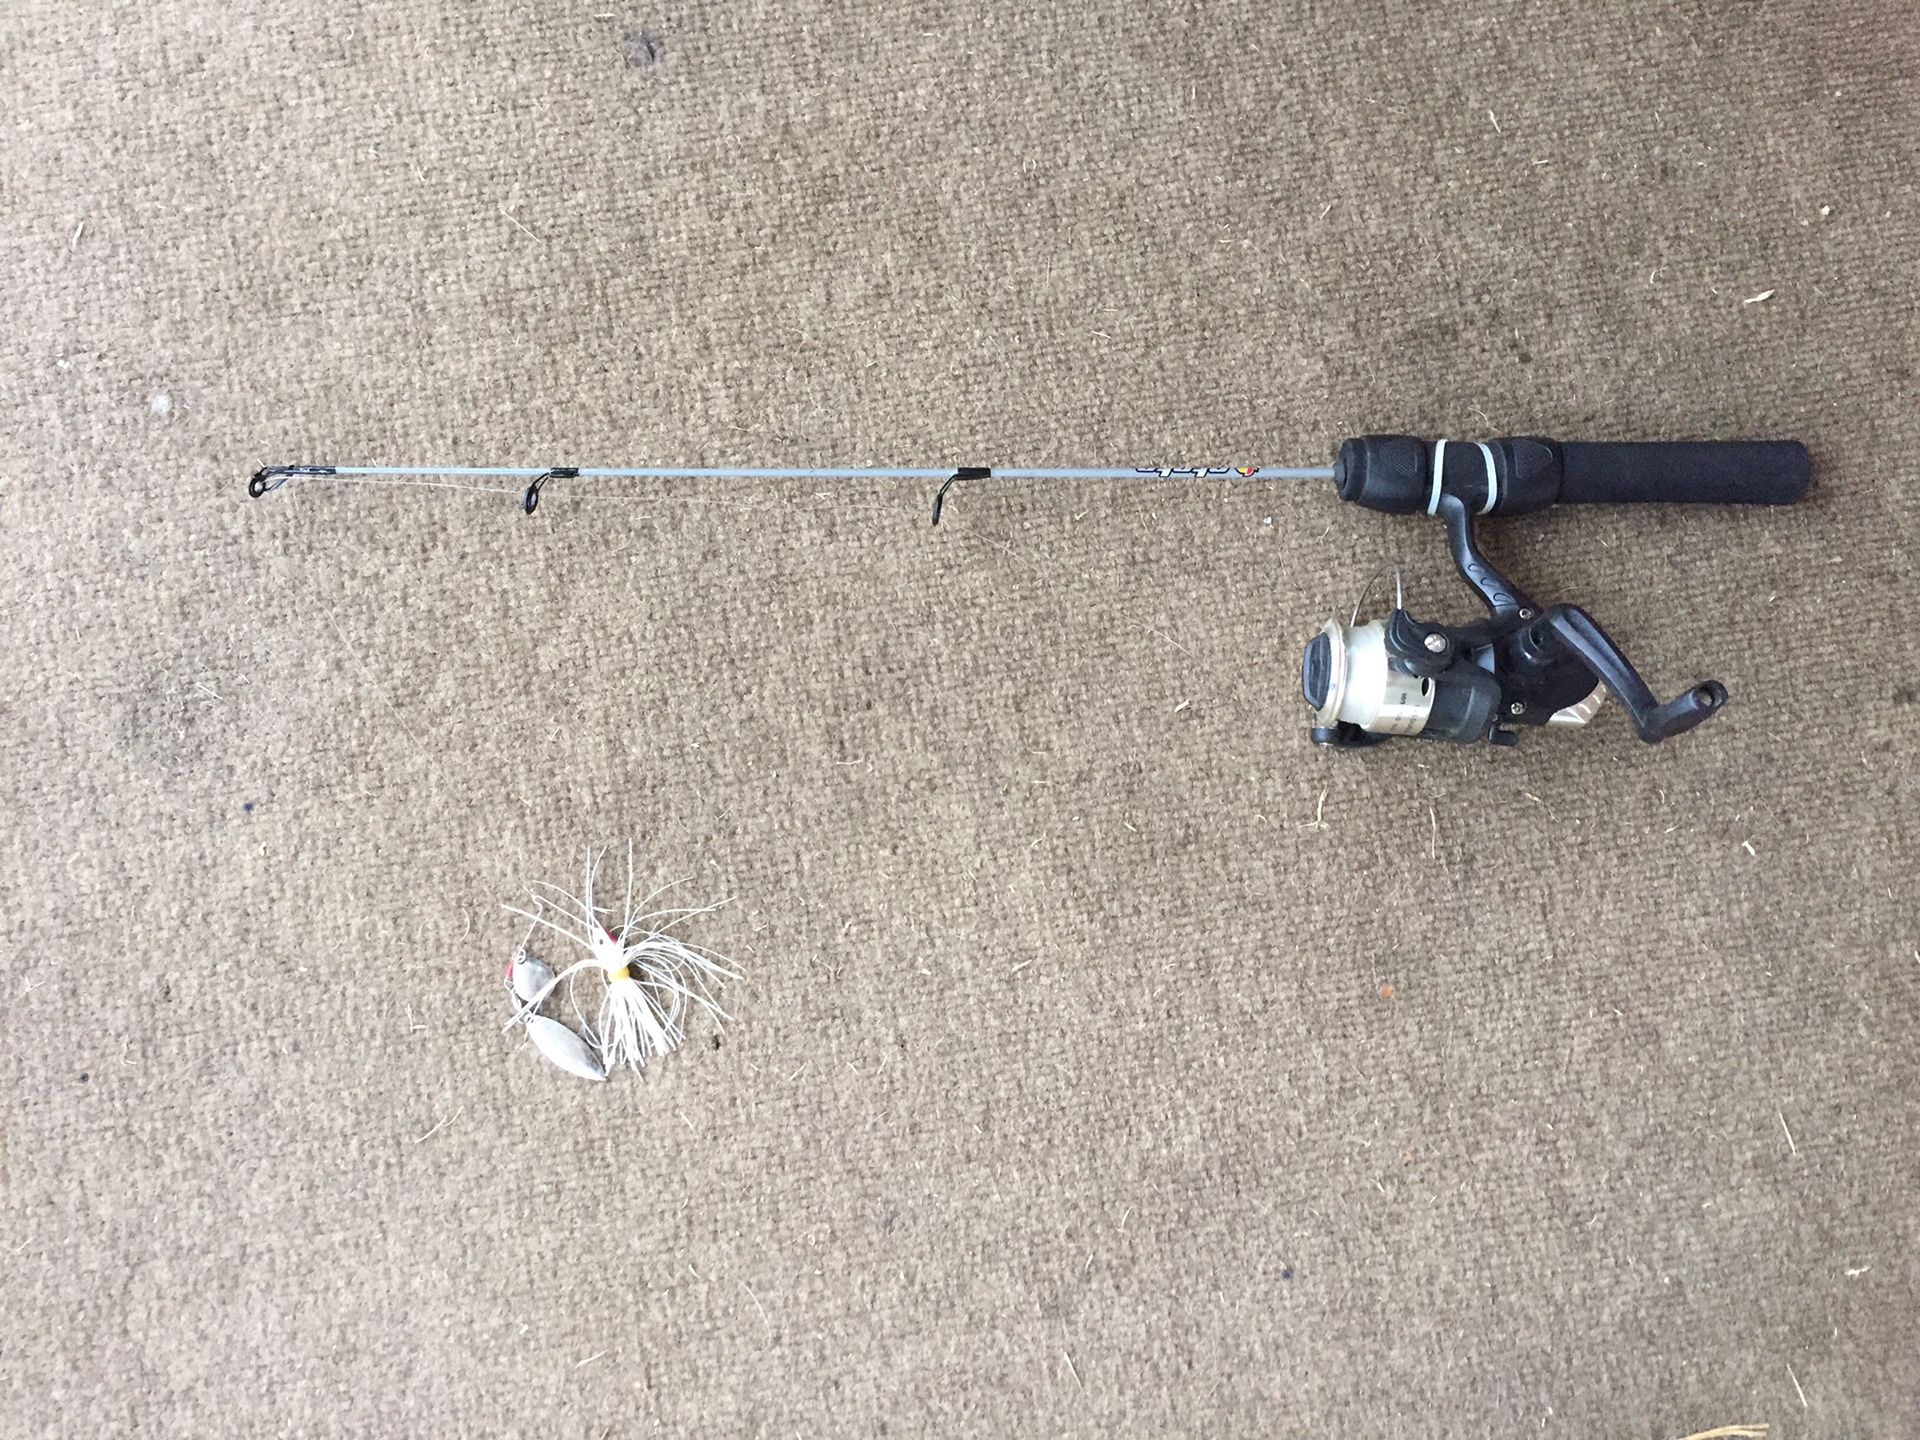 Small 2 foot no brand name fishing rod and reel